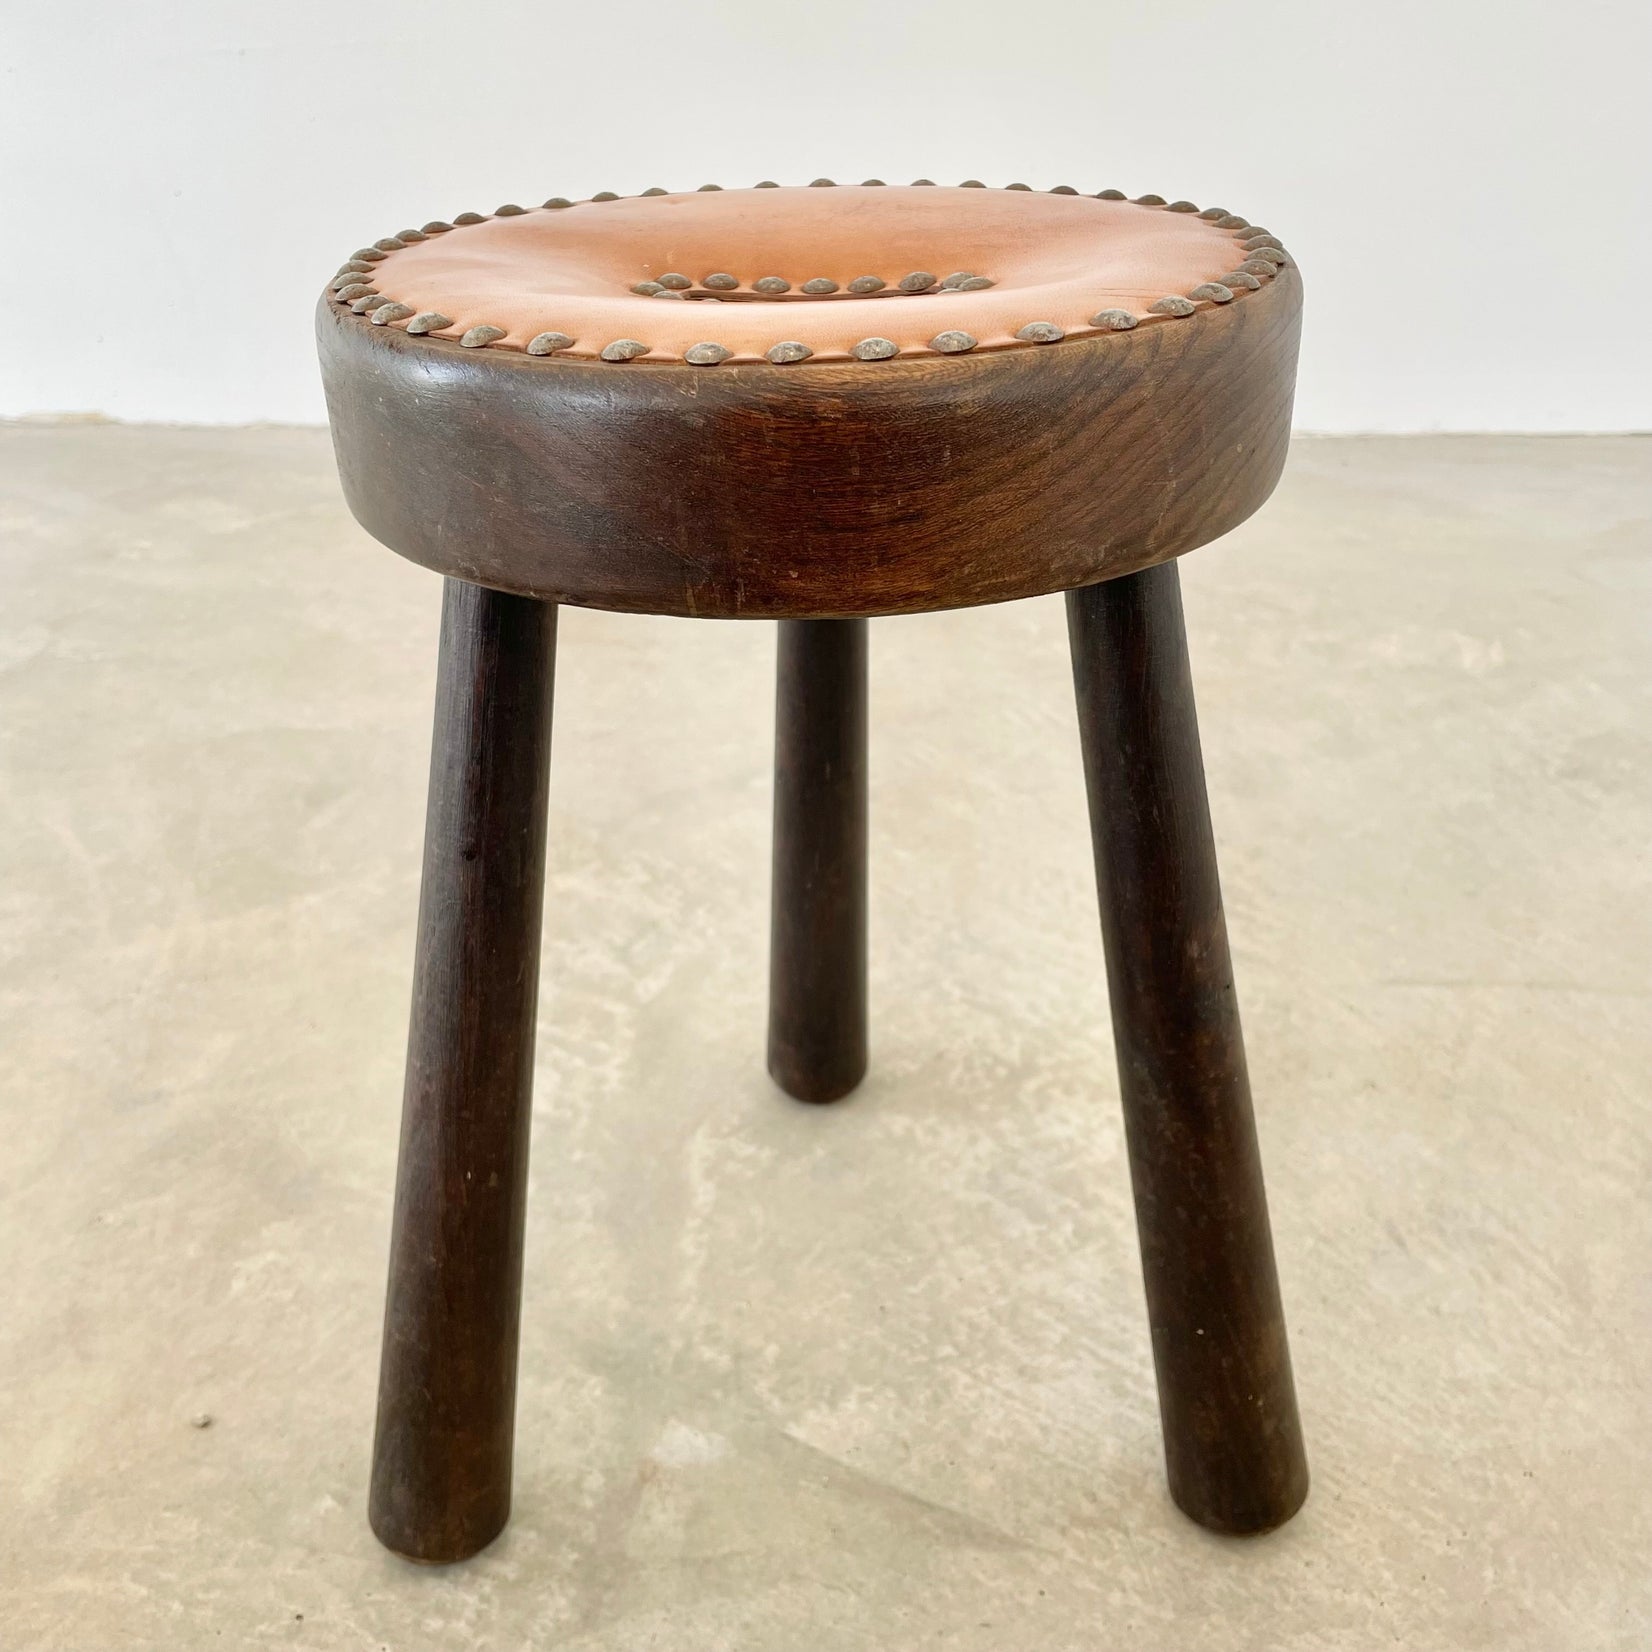 Leather and Wood Studded Stool, 1970s France